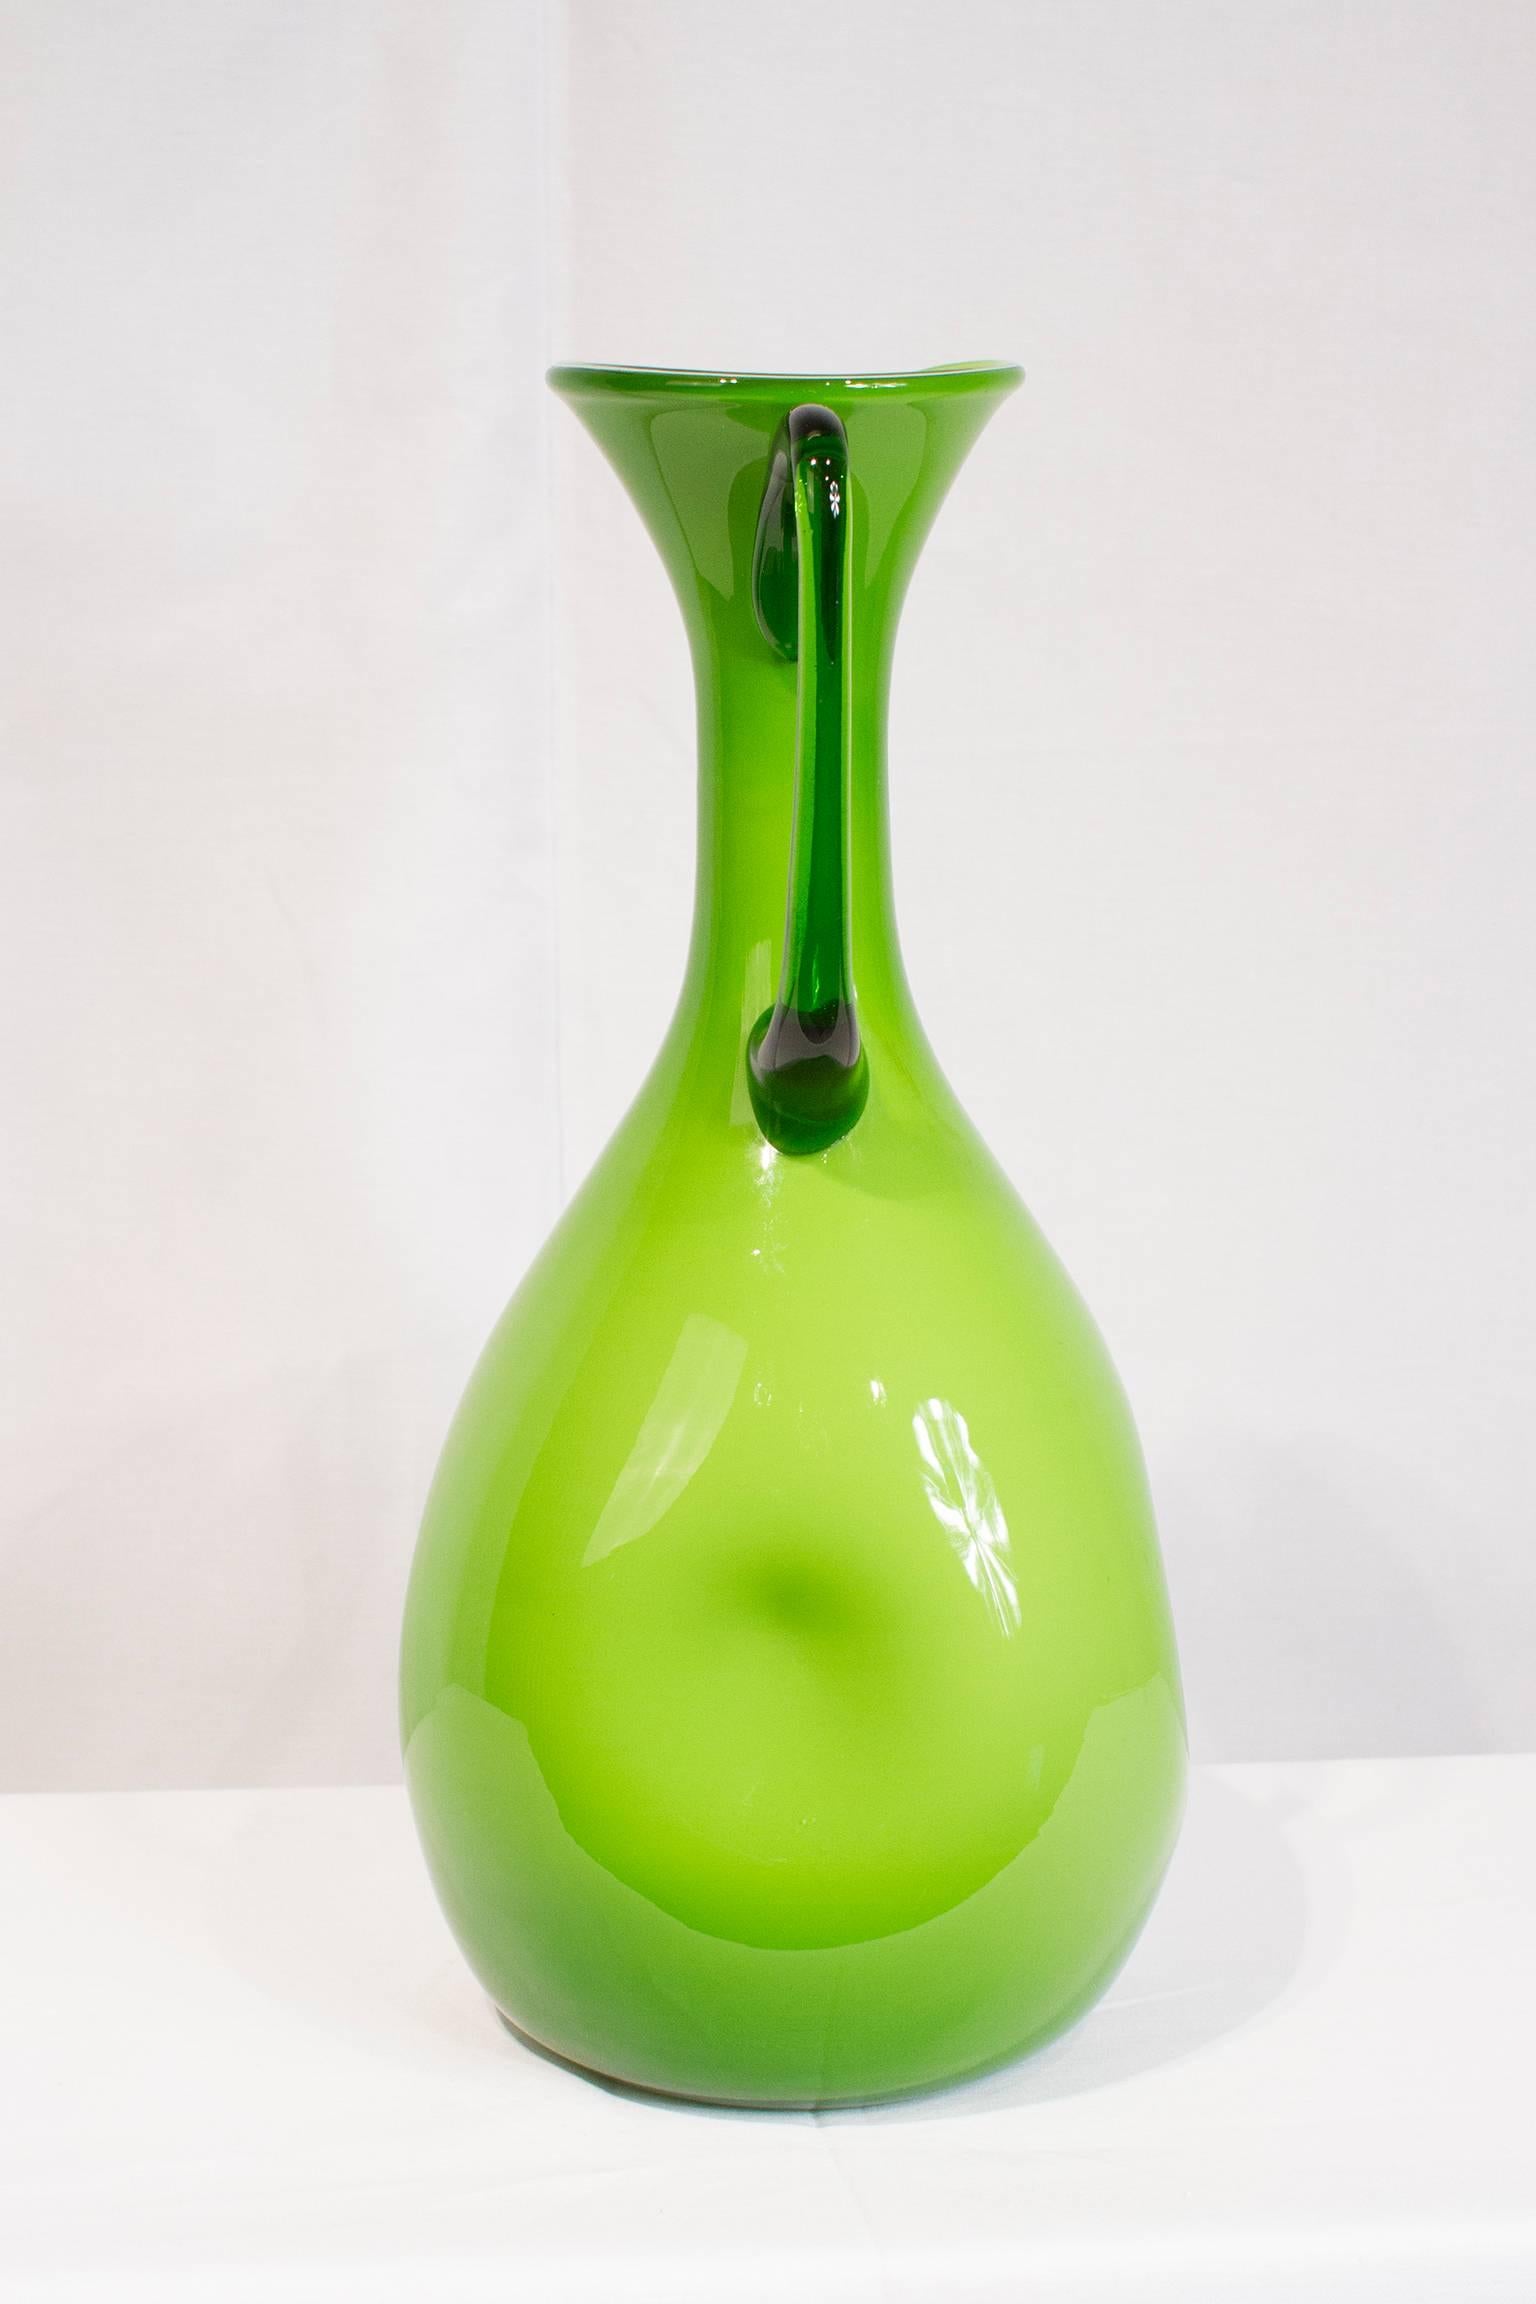 Italian Empoli art glass from the mid-20th century. Excellent condition.
Available in larger assortments.  
Please look at our Storefront page to browse our entire collection. 
 